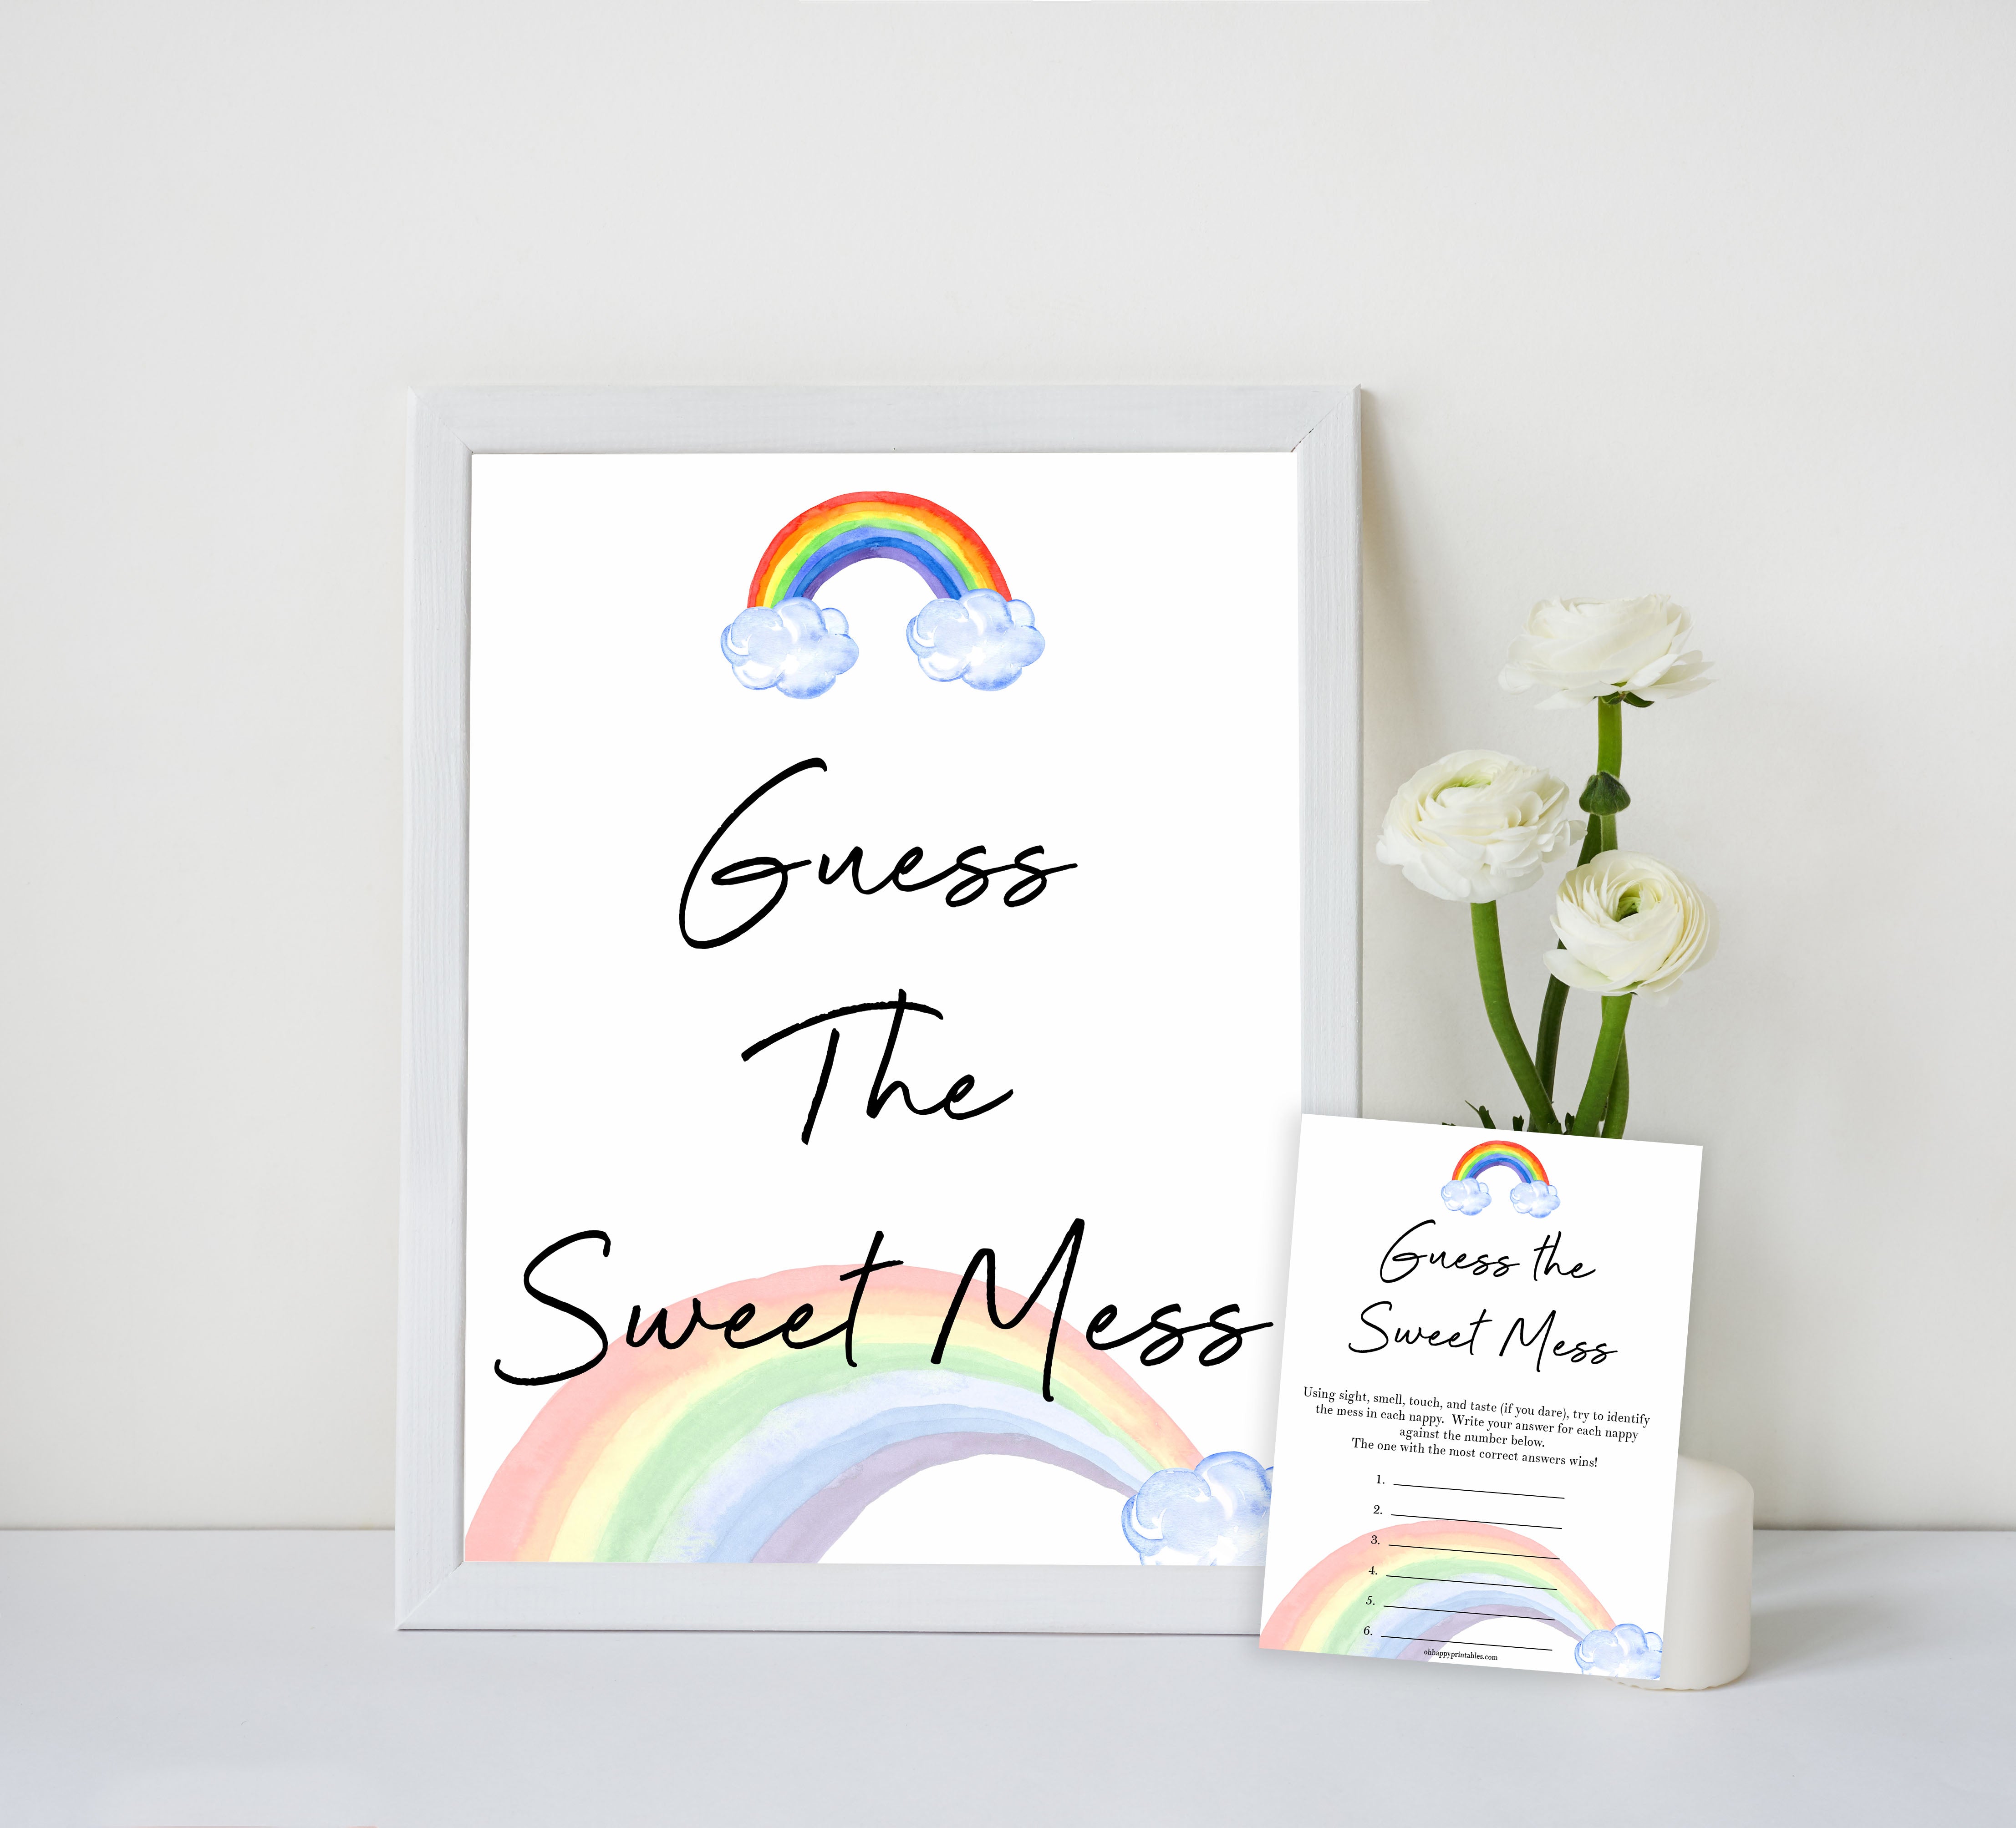 Rainbow baby games, rainbow guess the sweet mess, rainbow printable baby games, instant download games, rainbow baby shower, printable baby games, fun baby games, popular baby games, top 10 baby games